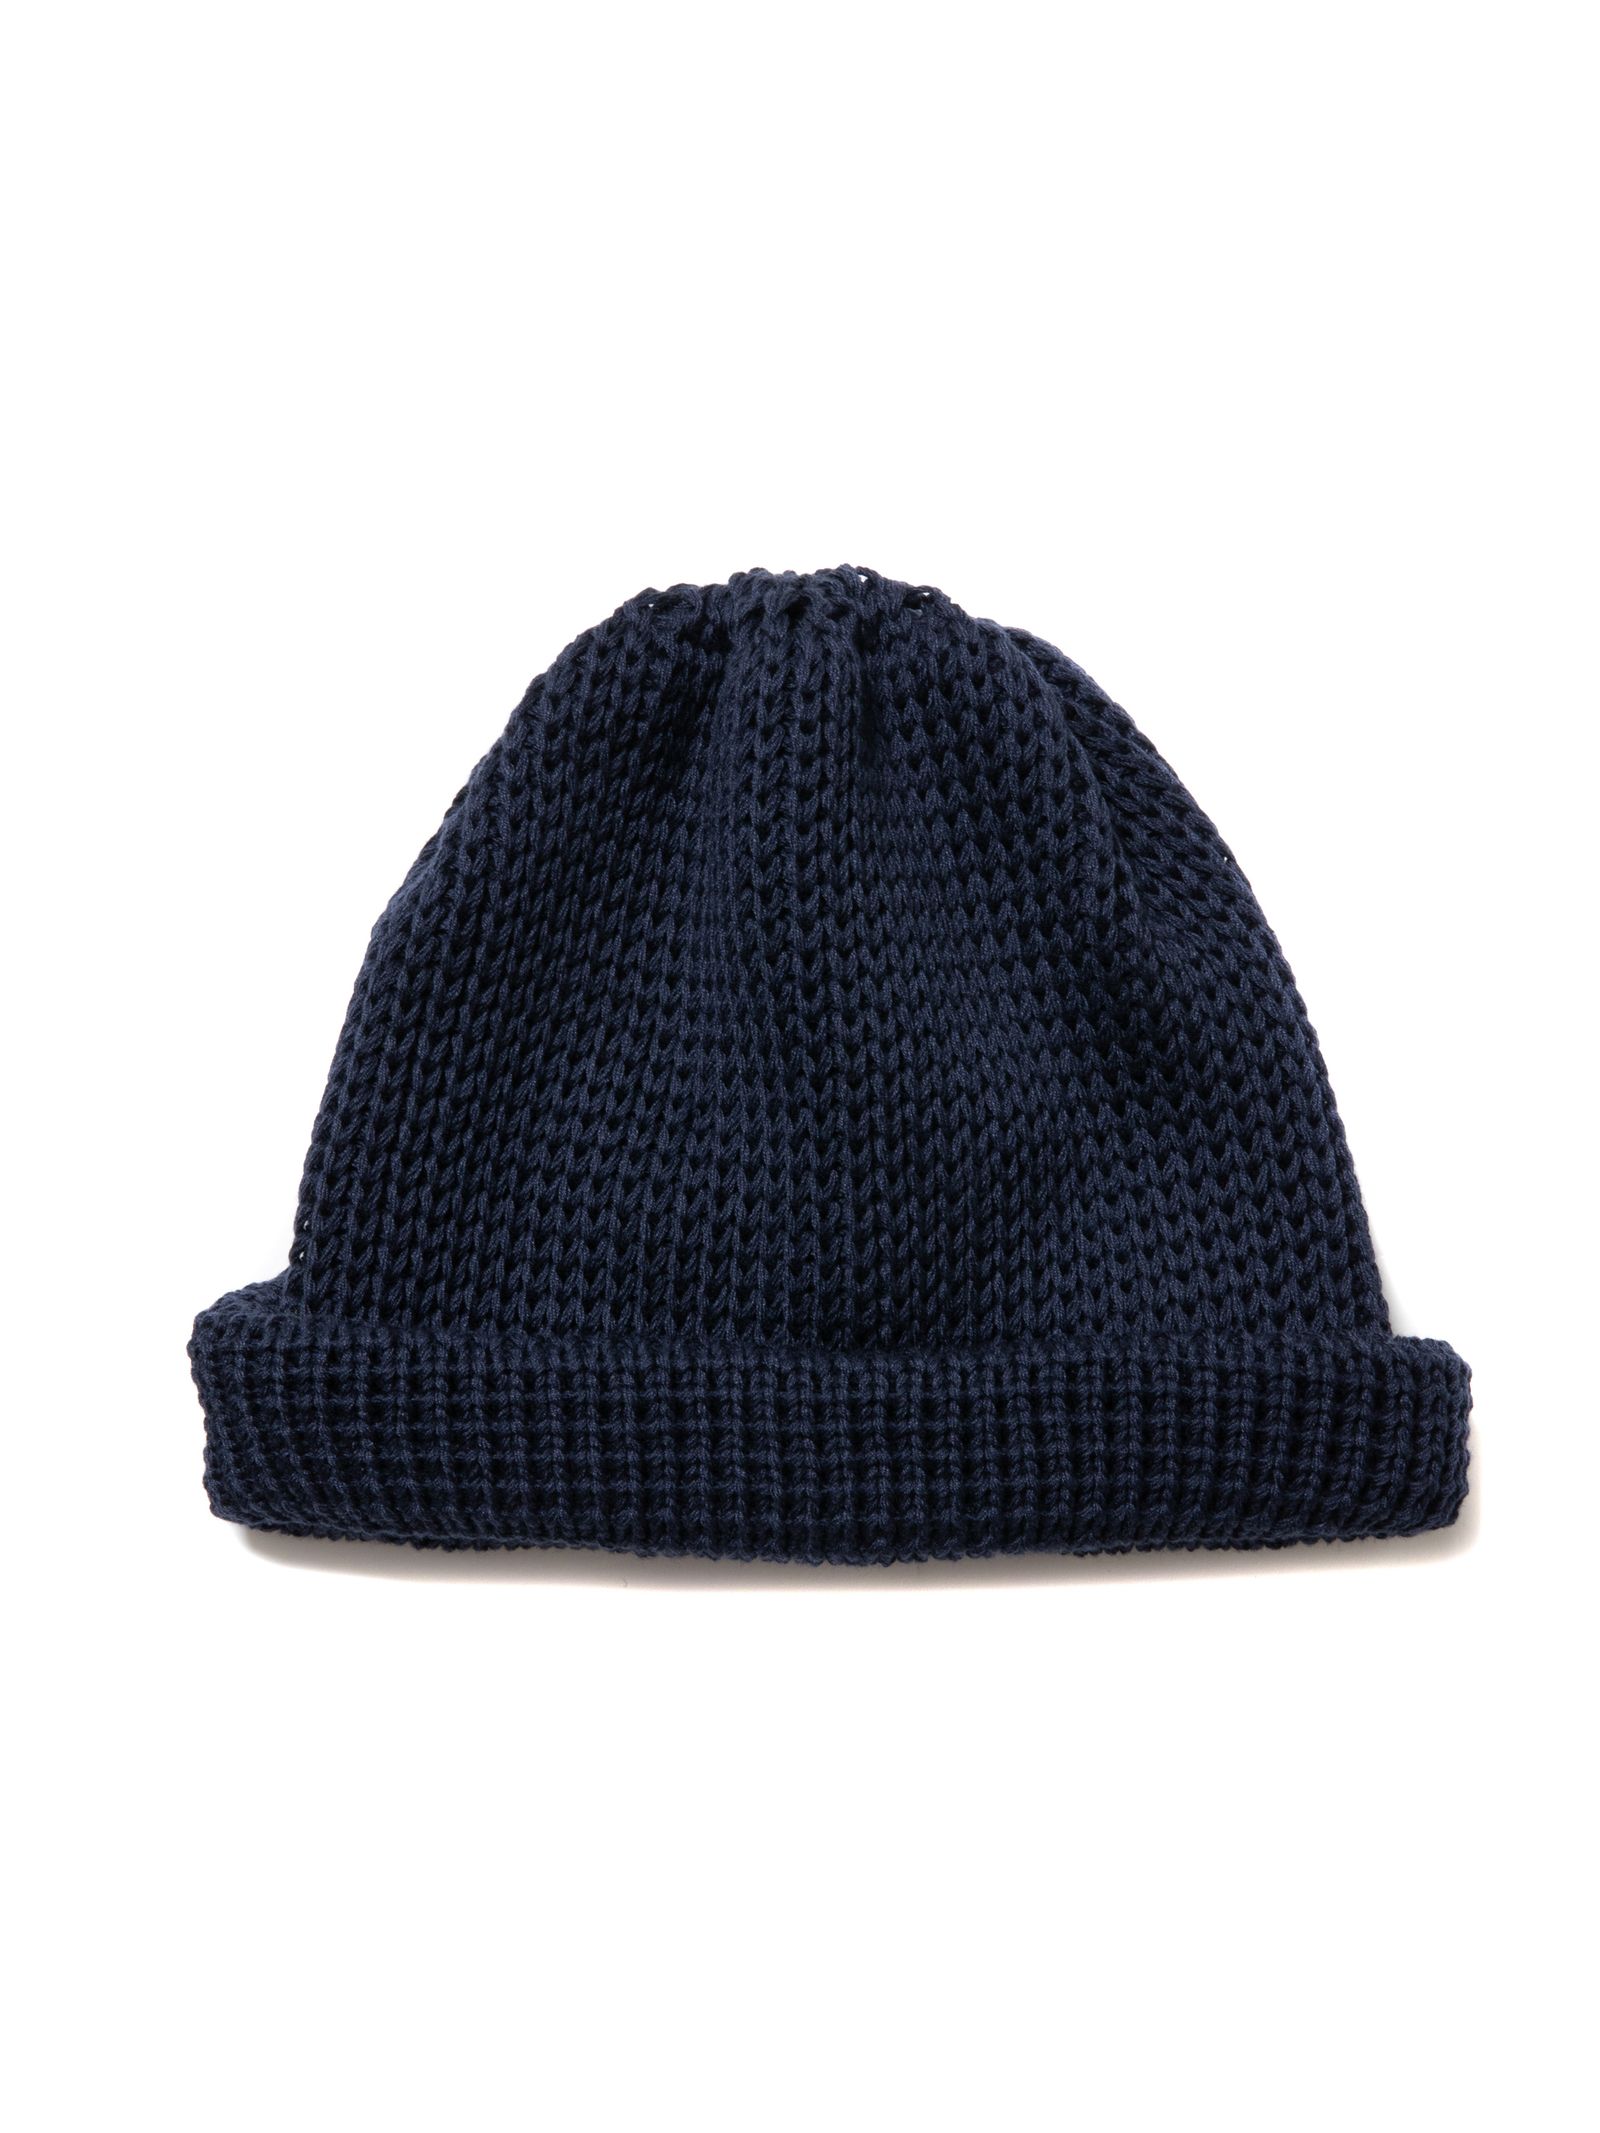 COOTIE PRODUCTIONS - Lowgauge Roll Up Beanie / Navy / ロールアップ 